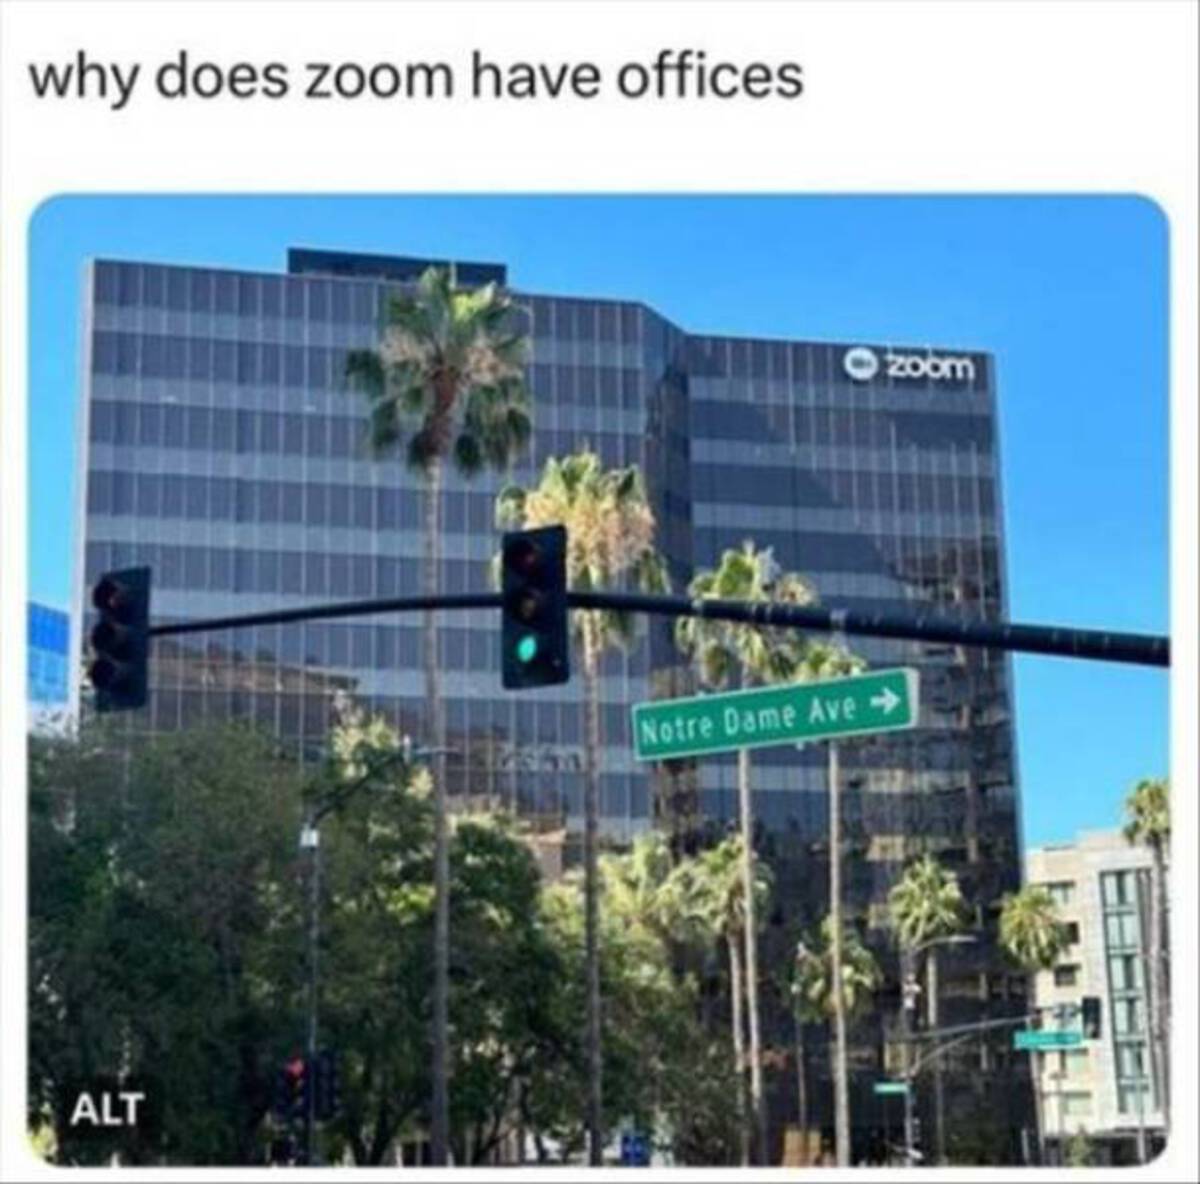 does zoom have offices - why does zoom have offices Alt zoom Notre Dame Ave>